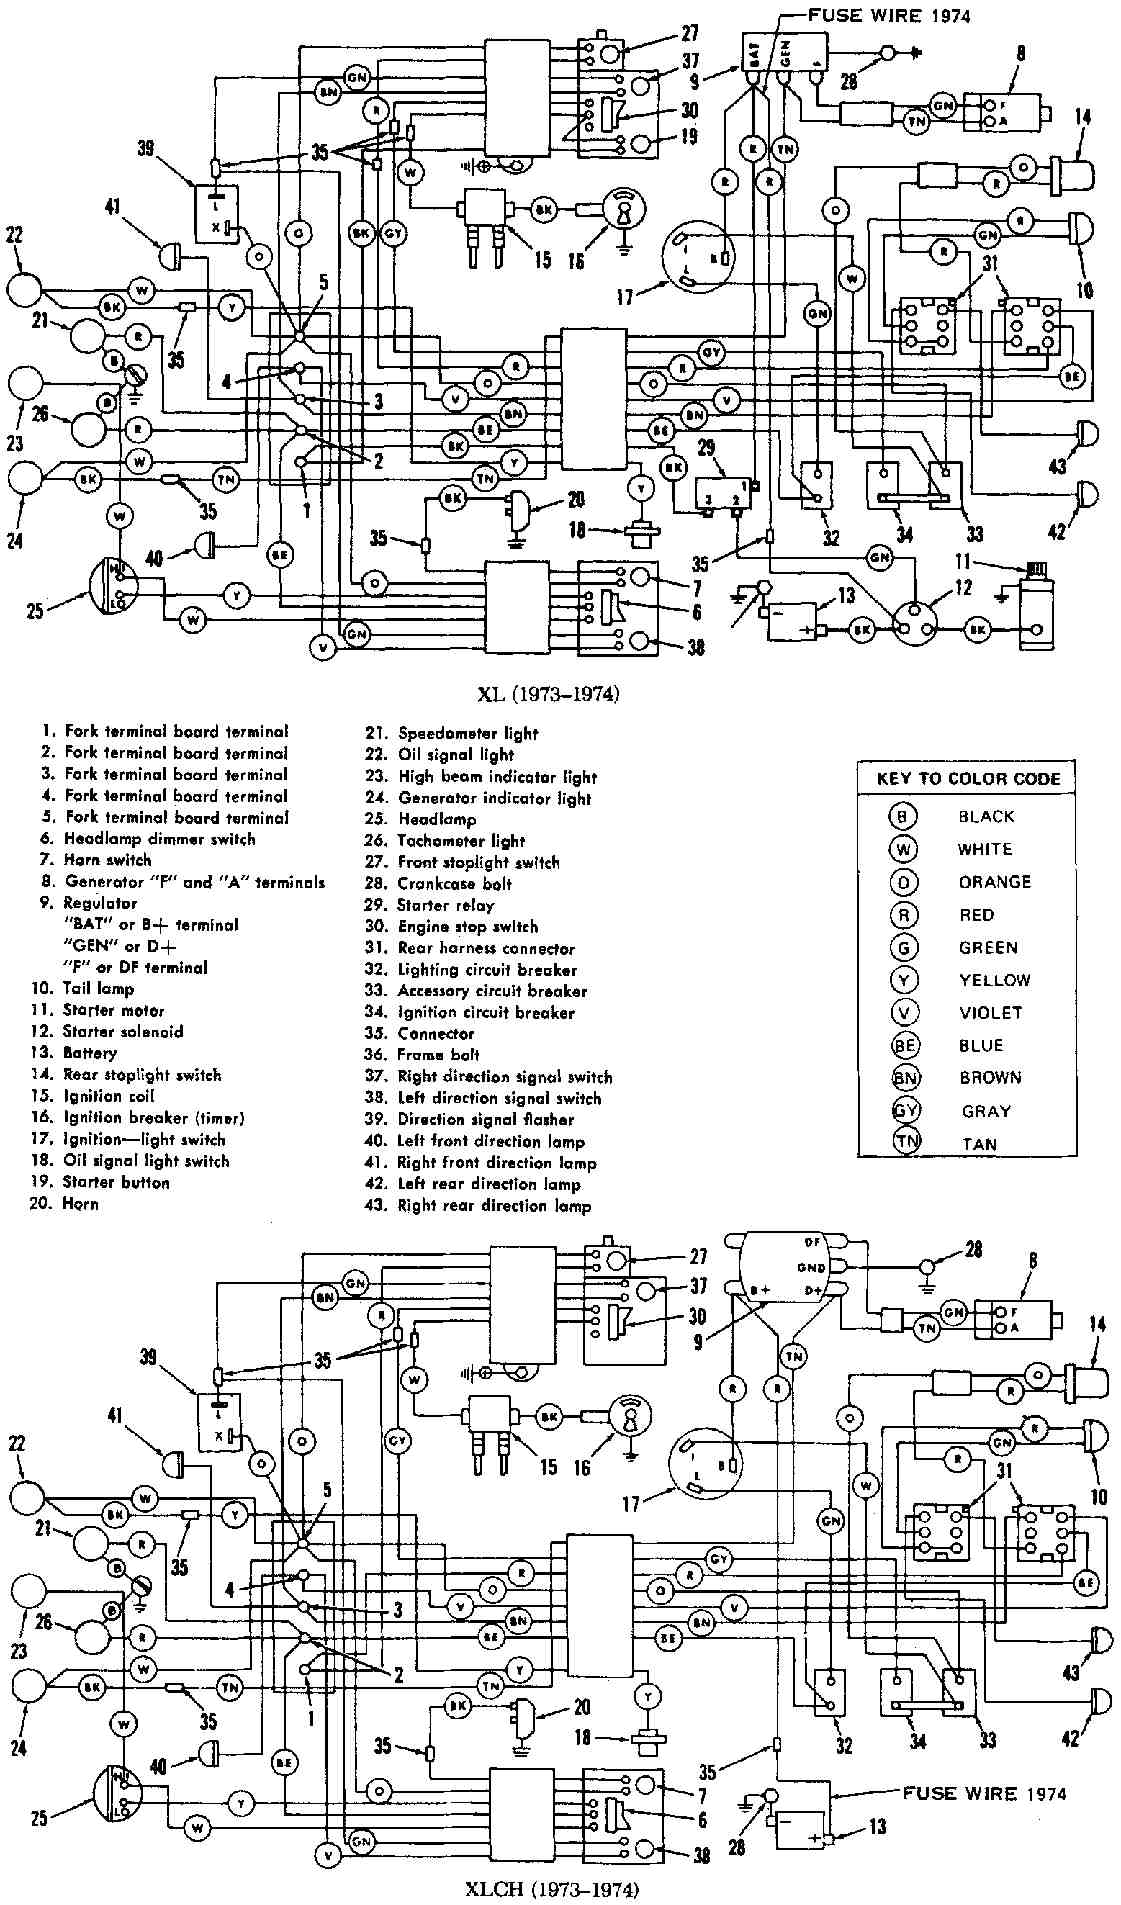 5 Pole Ignition Switch Wiring Diagram Full Hd Version Wiring Diagram Gear Diagram Mille Annonces Fr